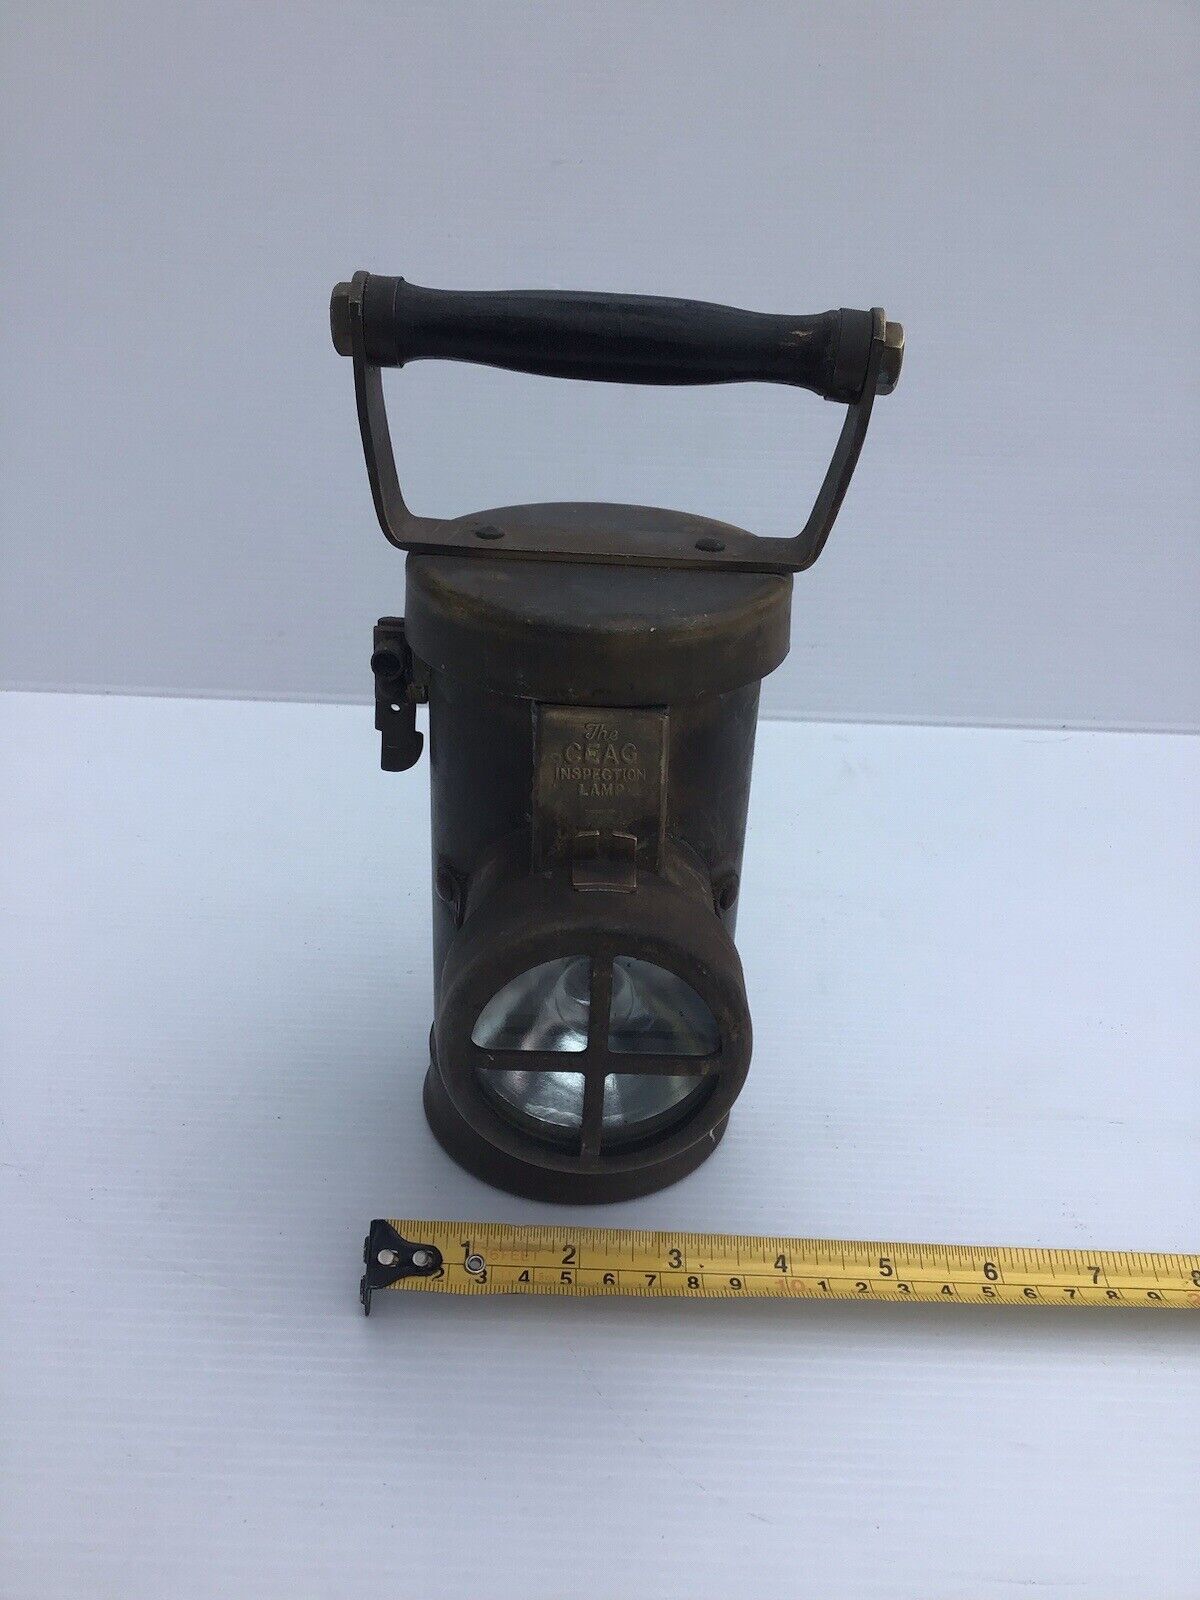 Vintage Preloved Mining The CEAG Brass Inspection Lamp with battery